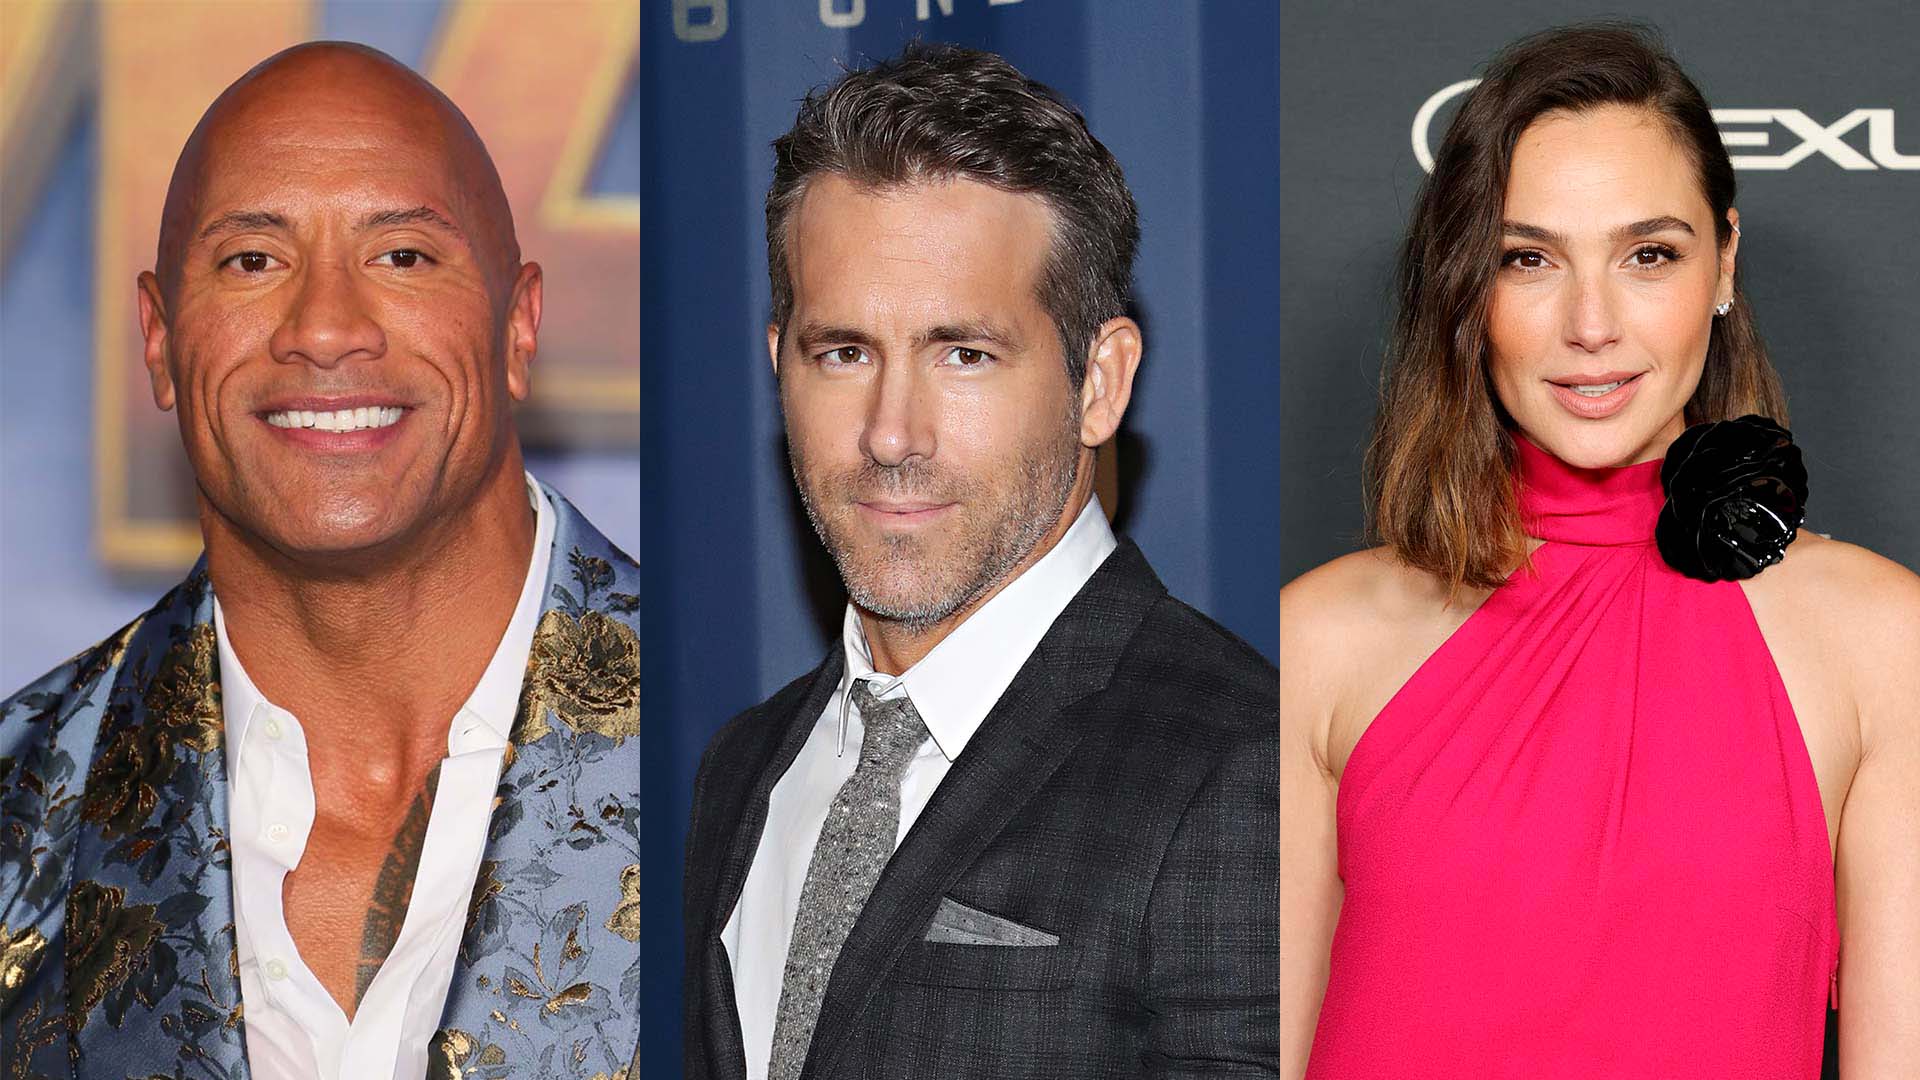 New Trailer: Dwayne Johnson, Ryan Reynolds and Gal Gadot Team Up for Action-Comedy ‘Red Notice’ 